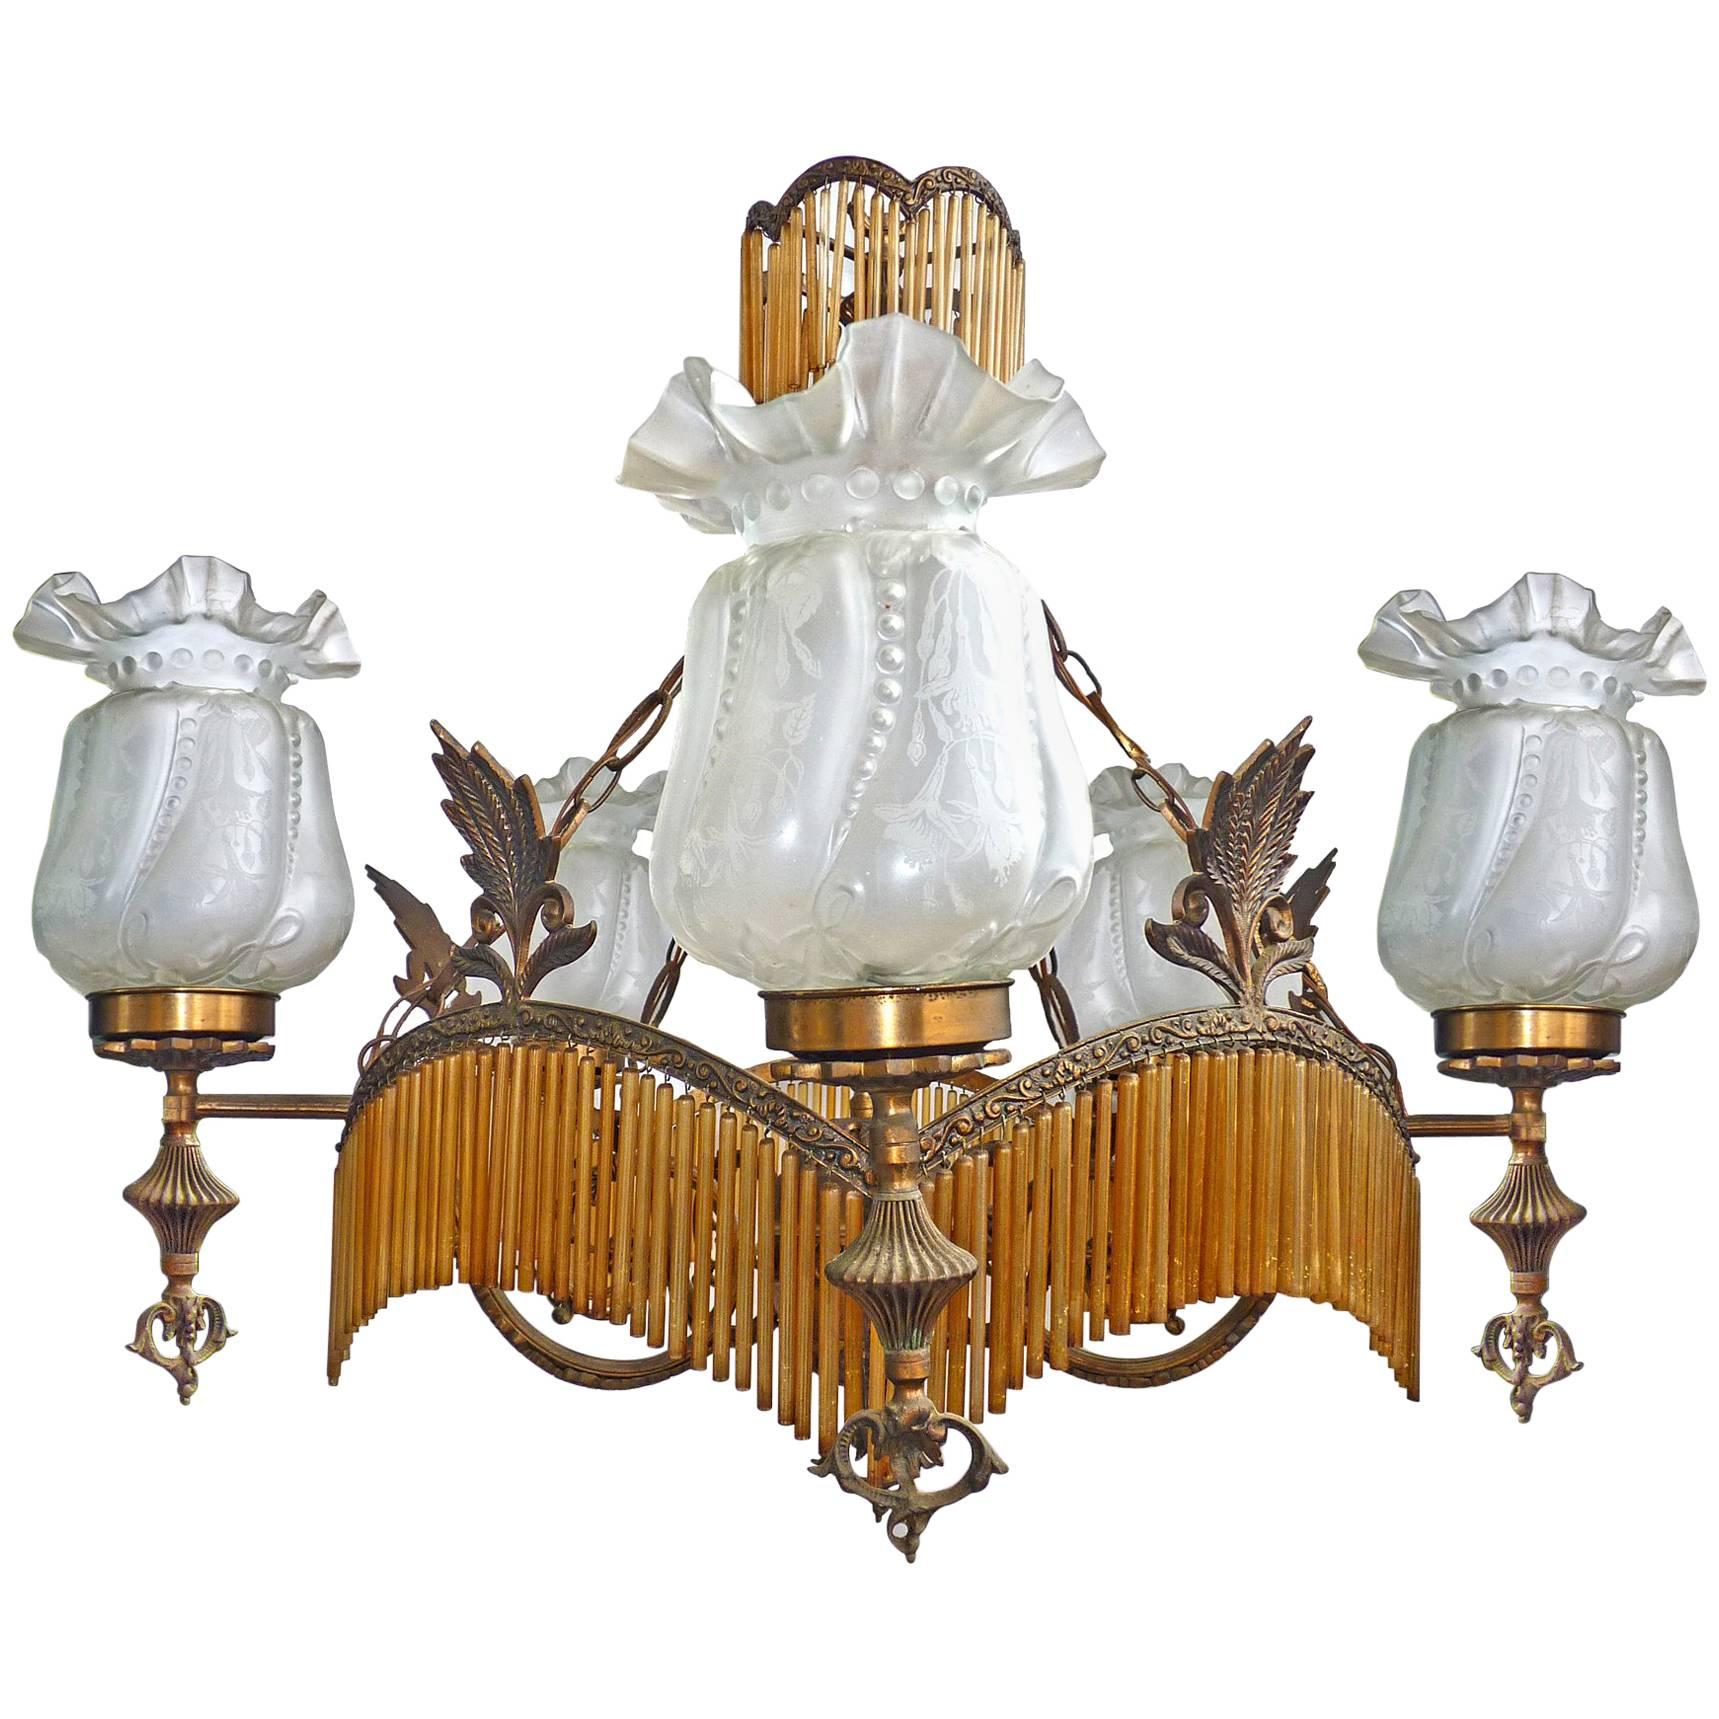 Large French Art Deco or Nouveau Amber Glass Fringe Hollywood Regency Chandelier In Excellent Condition For Sale In Coimbra, PT